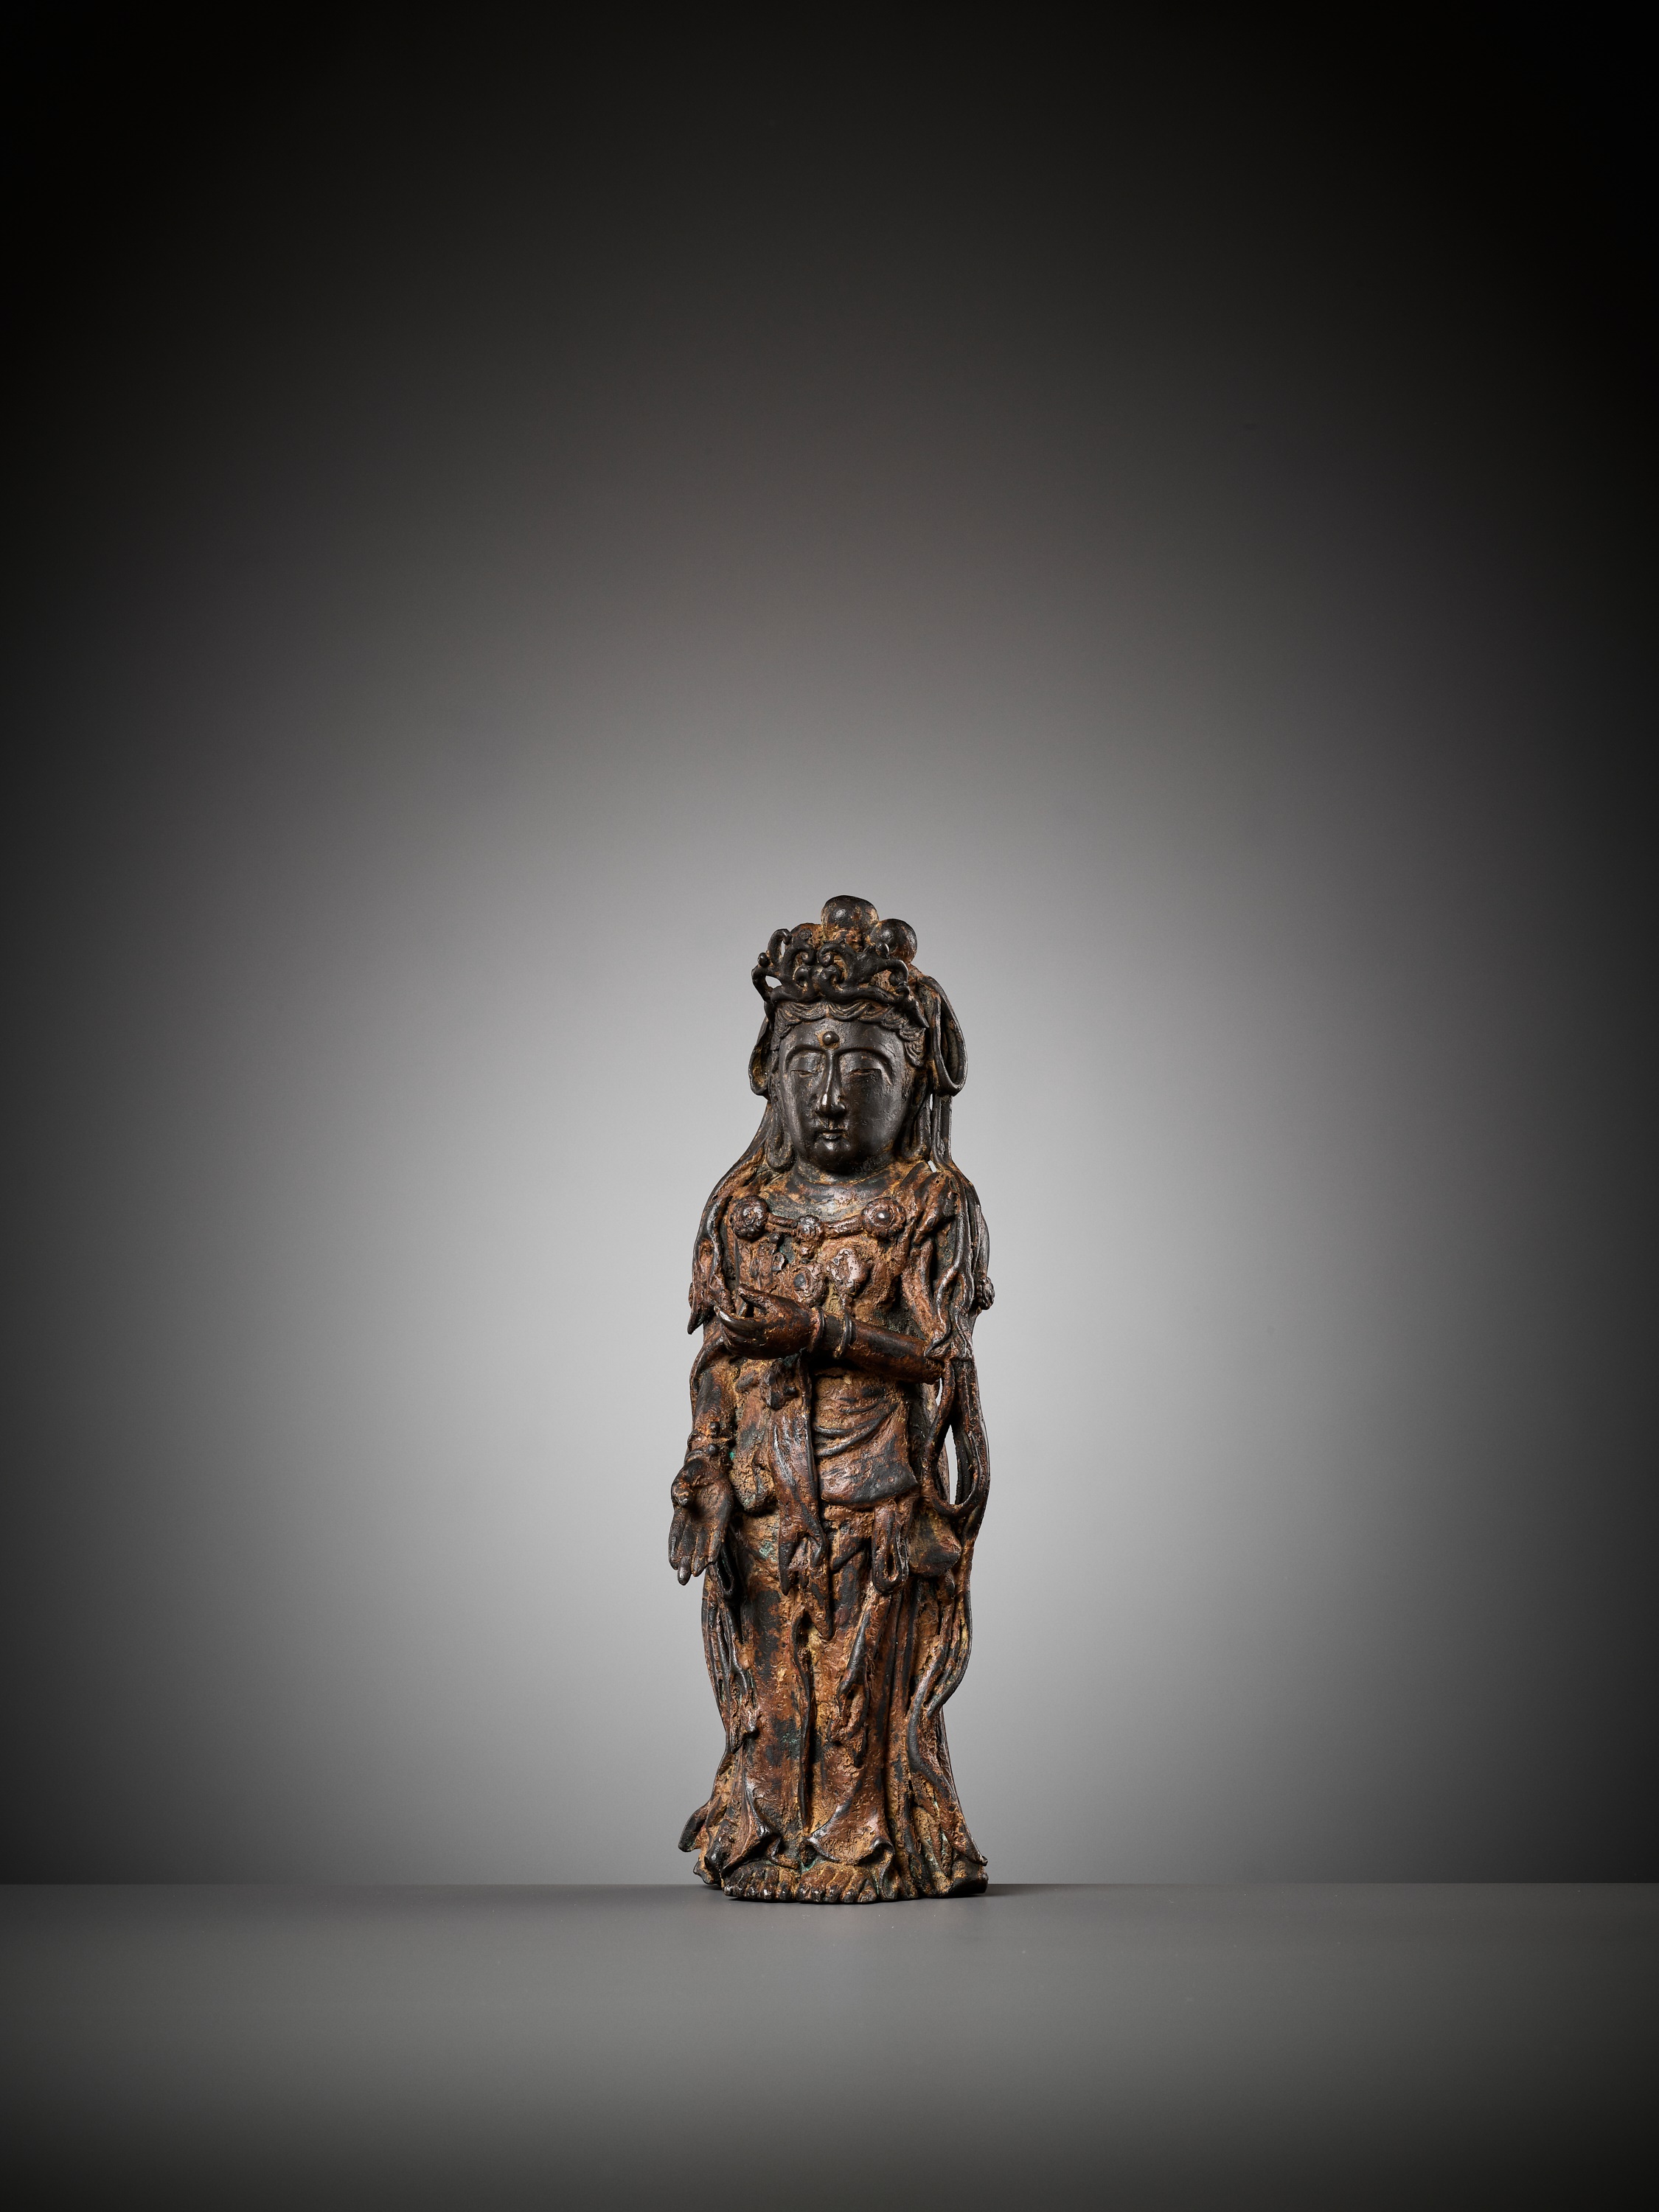 AN EXCEEDINGLY RARE BRONZE FIGURE OF GUANYIN, DALI KINGDOM, 12TH - MID-13TH CENTURY - Image 15 of 20